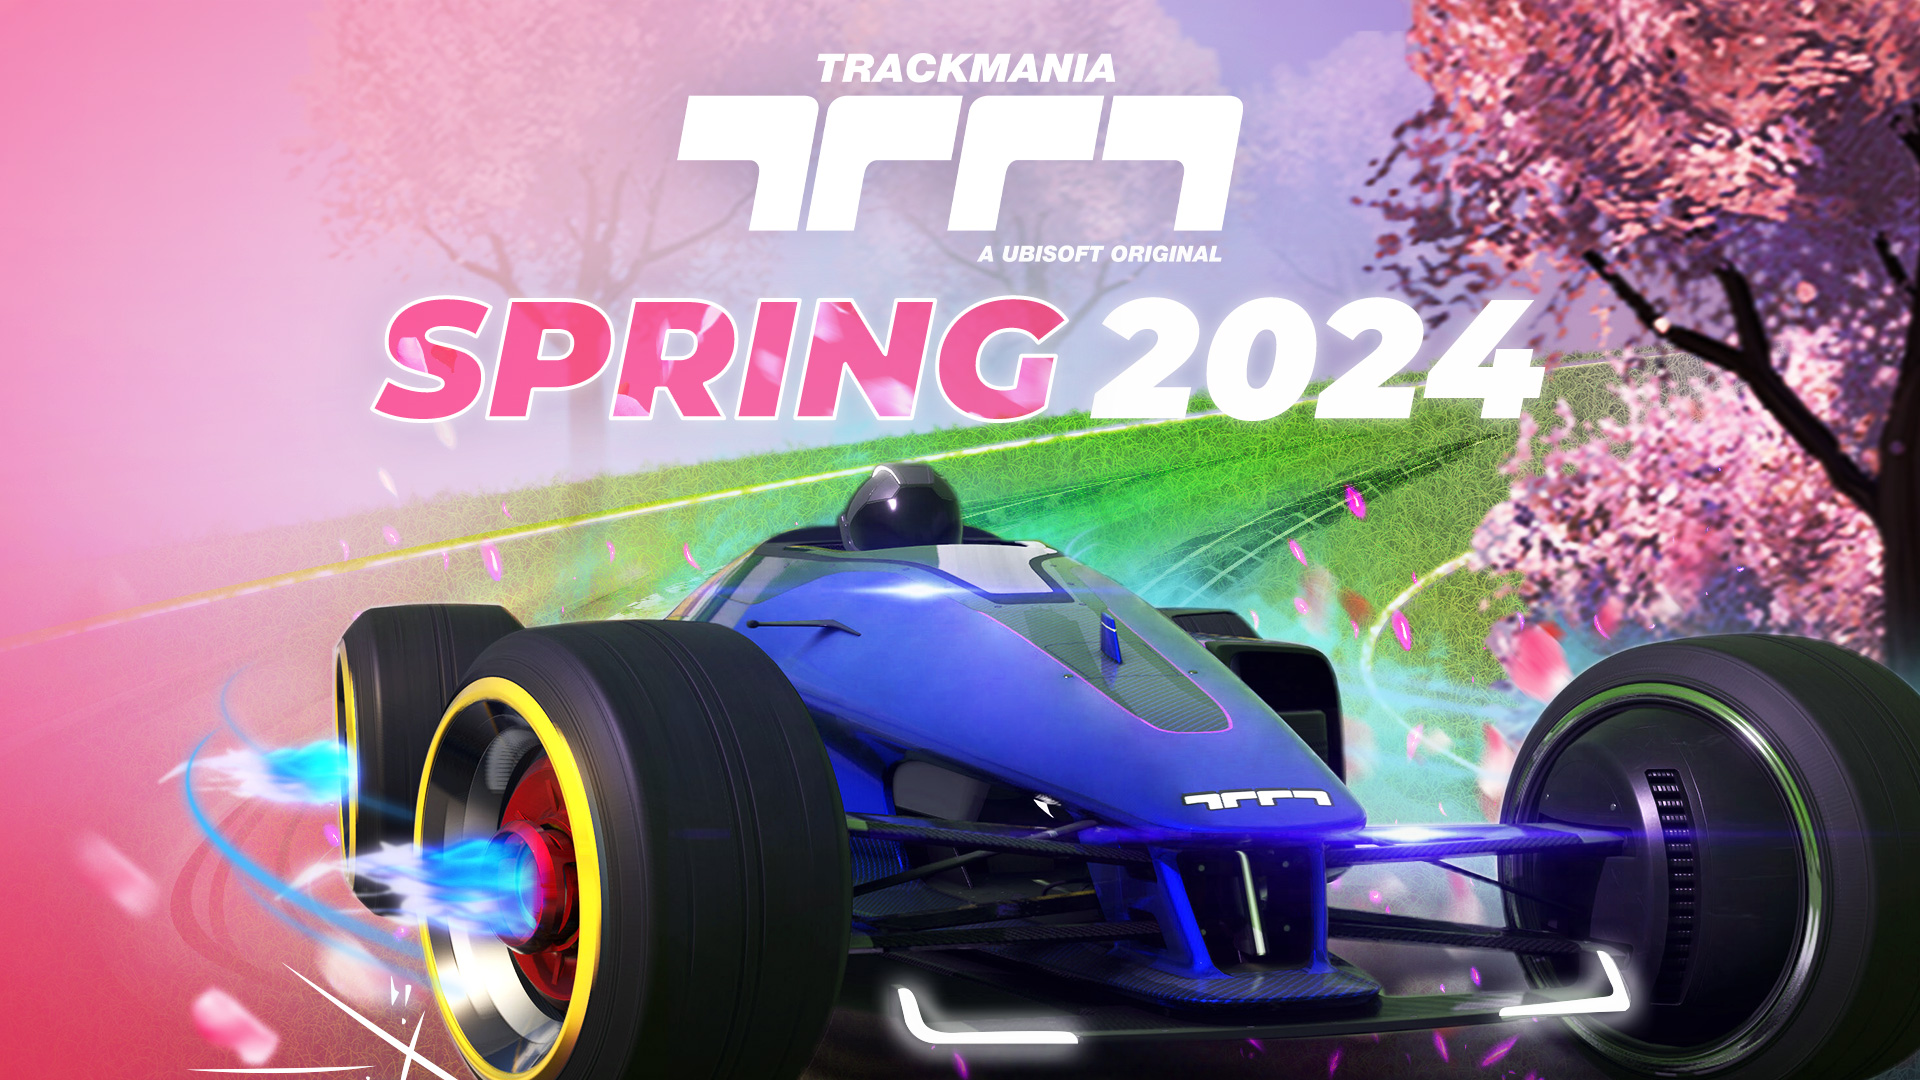 THE SPRING 2024 CAMPAIGN WILL BE AVAILABLE ON APRIL 2ND!